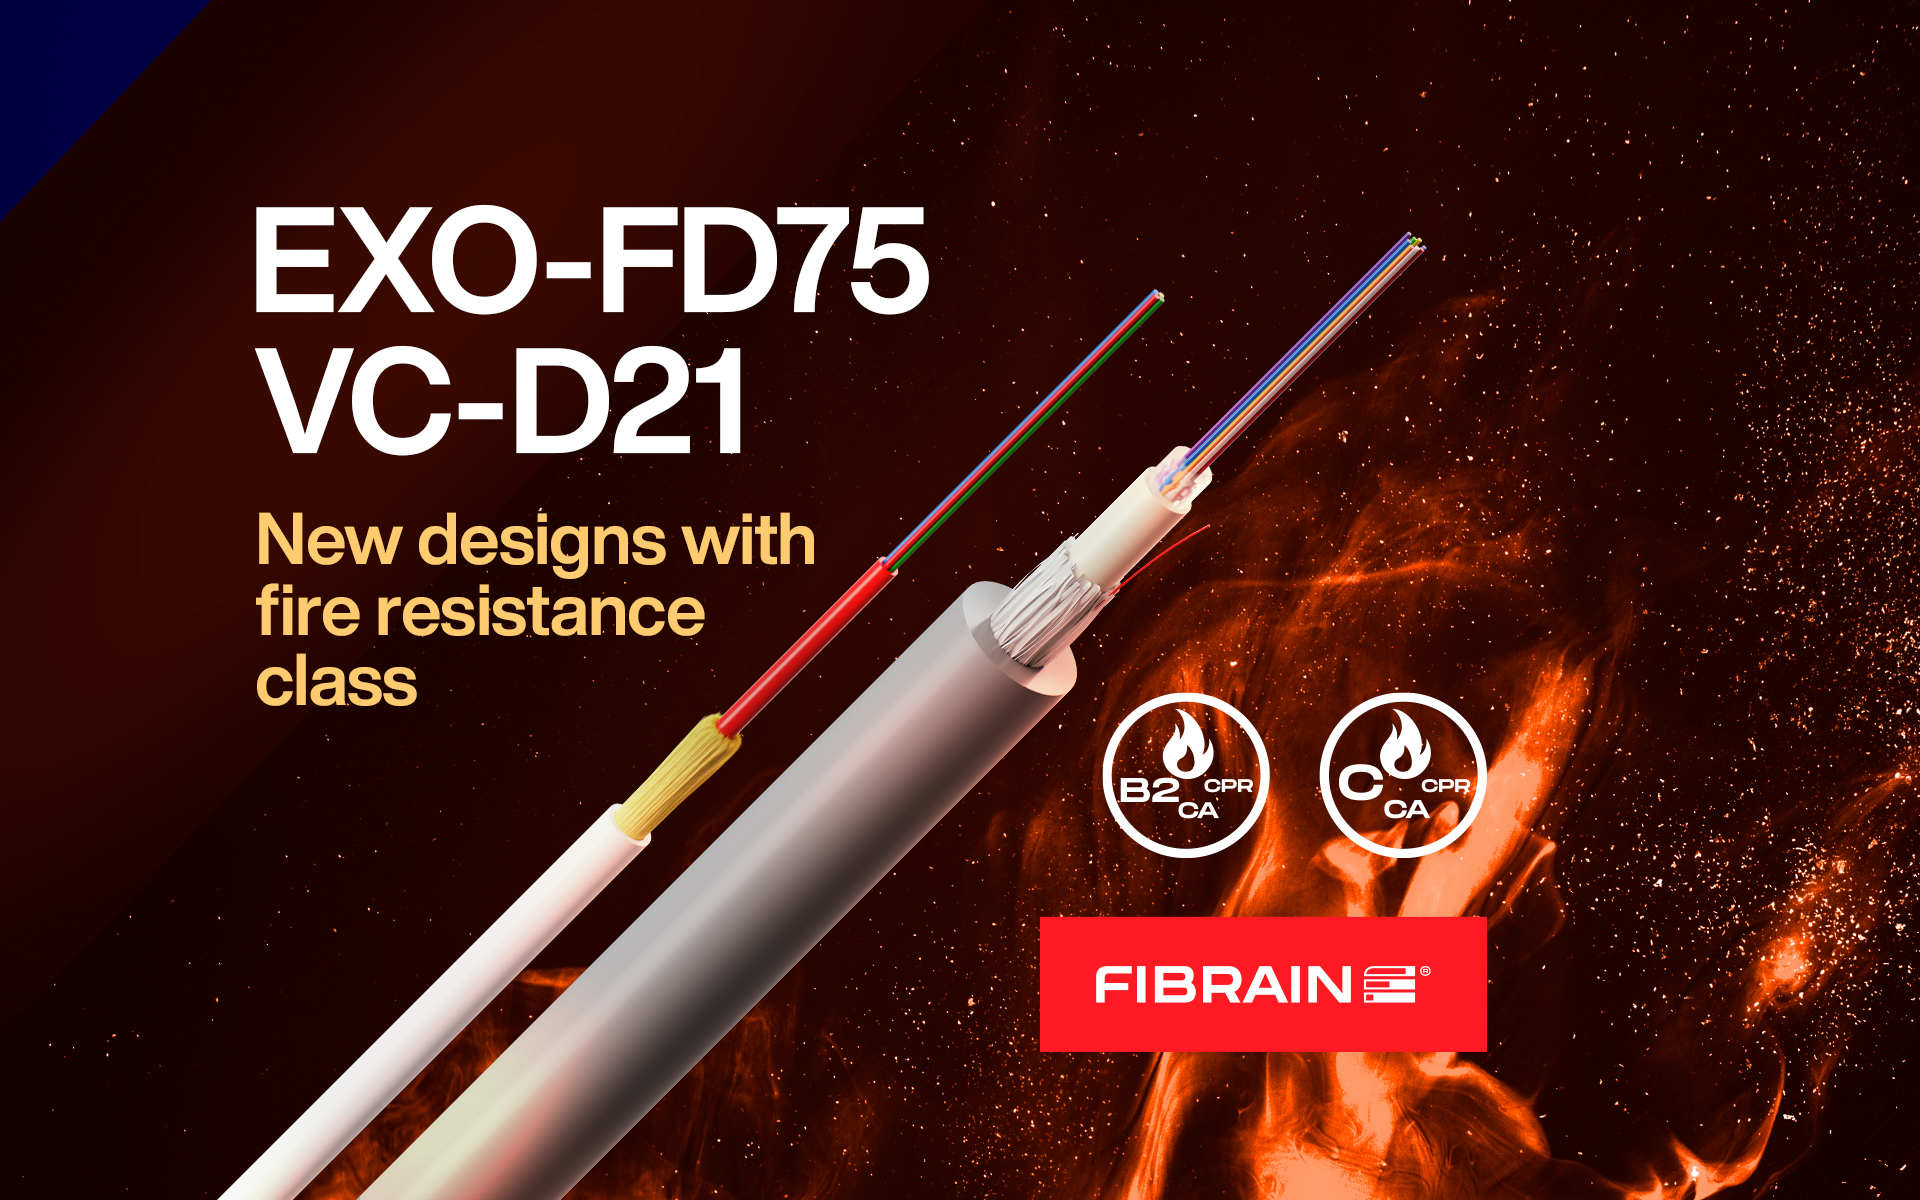 FIBRAIN cable new designs with fire resistance class!